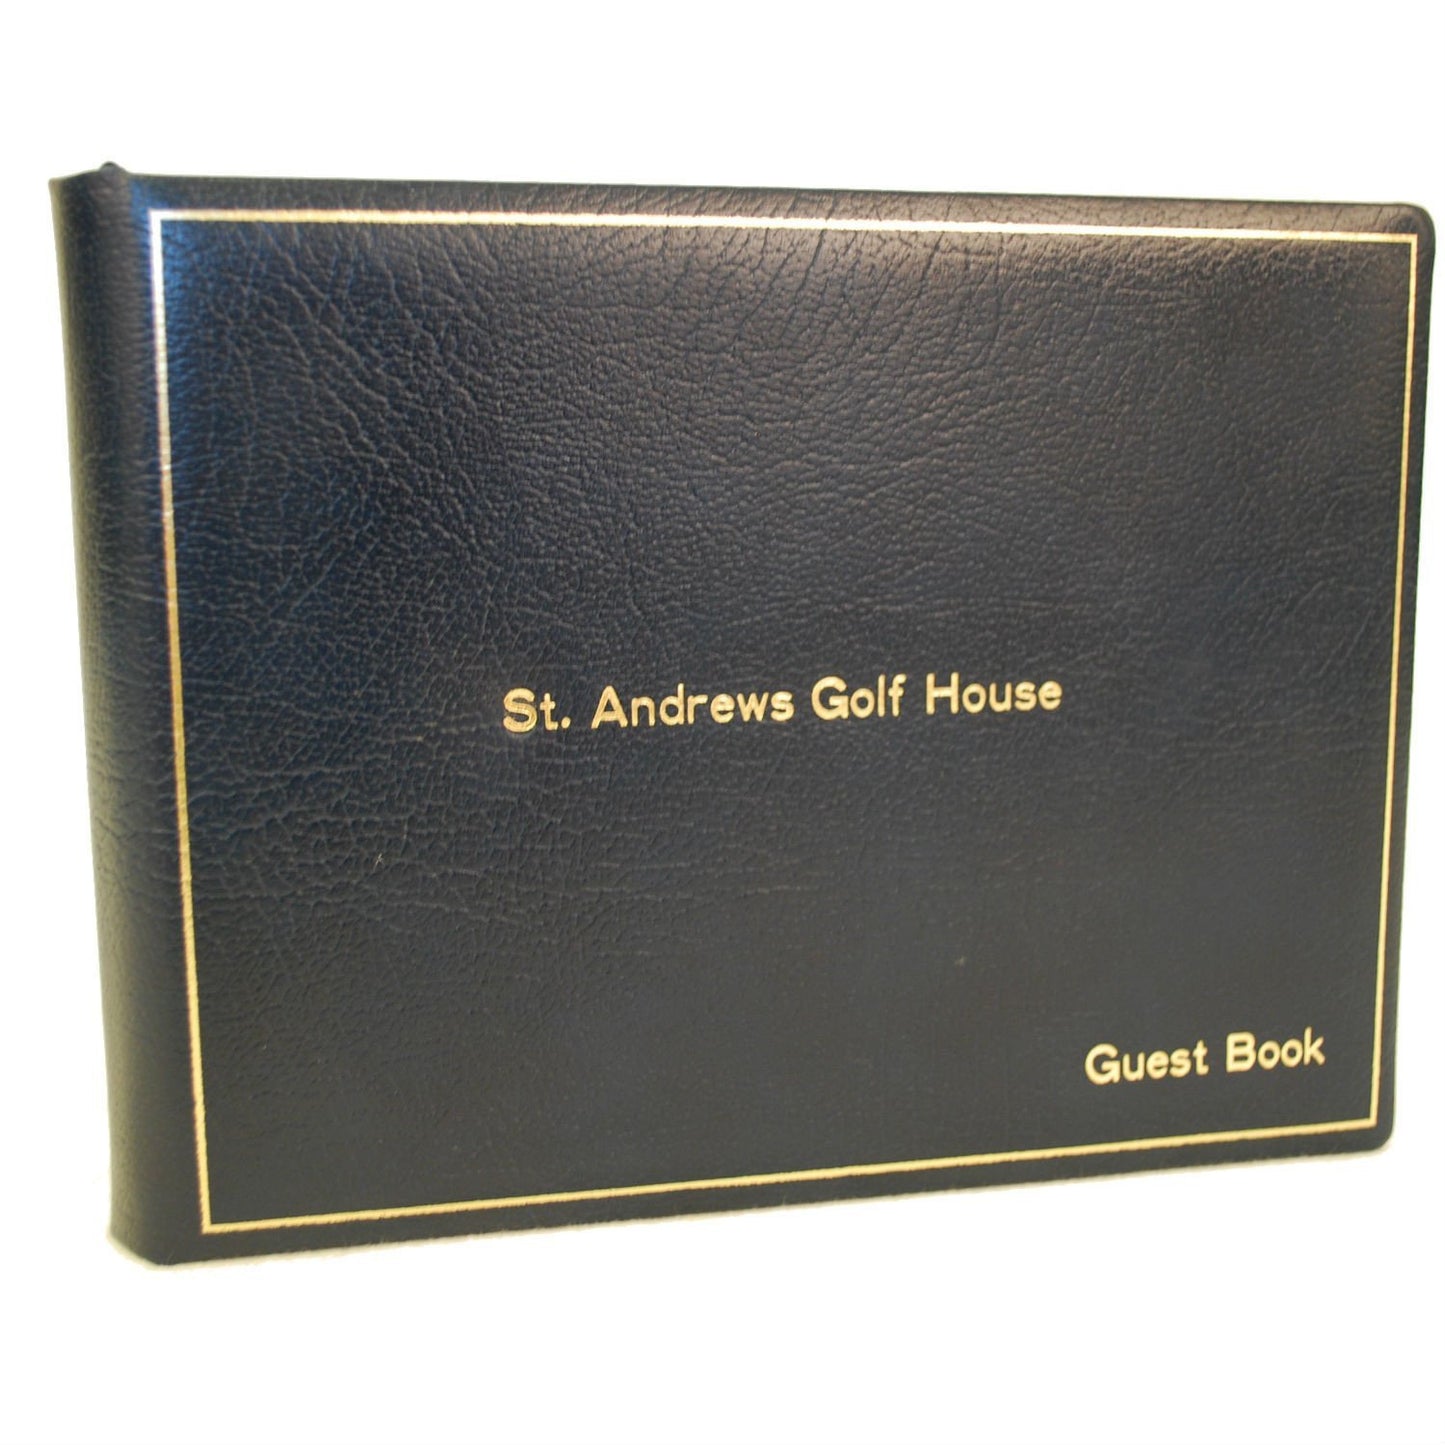 Bespoke Guest Book Album | Large and Thick | Luxury Leather | 10 by 12 Inches | Gilt Edges | Gilt Cover with Personalization | Blank Pages | Made in England | Charing Cross-Guest Book-Sterling-and-Burke